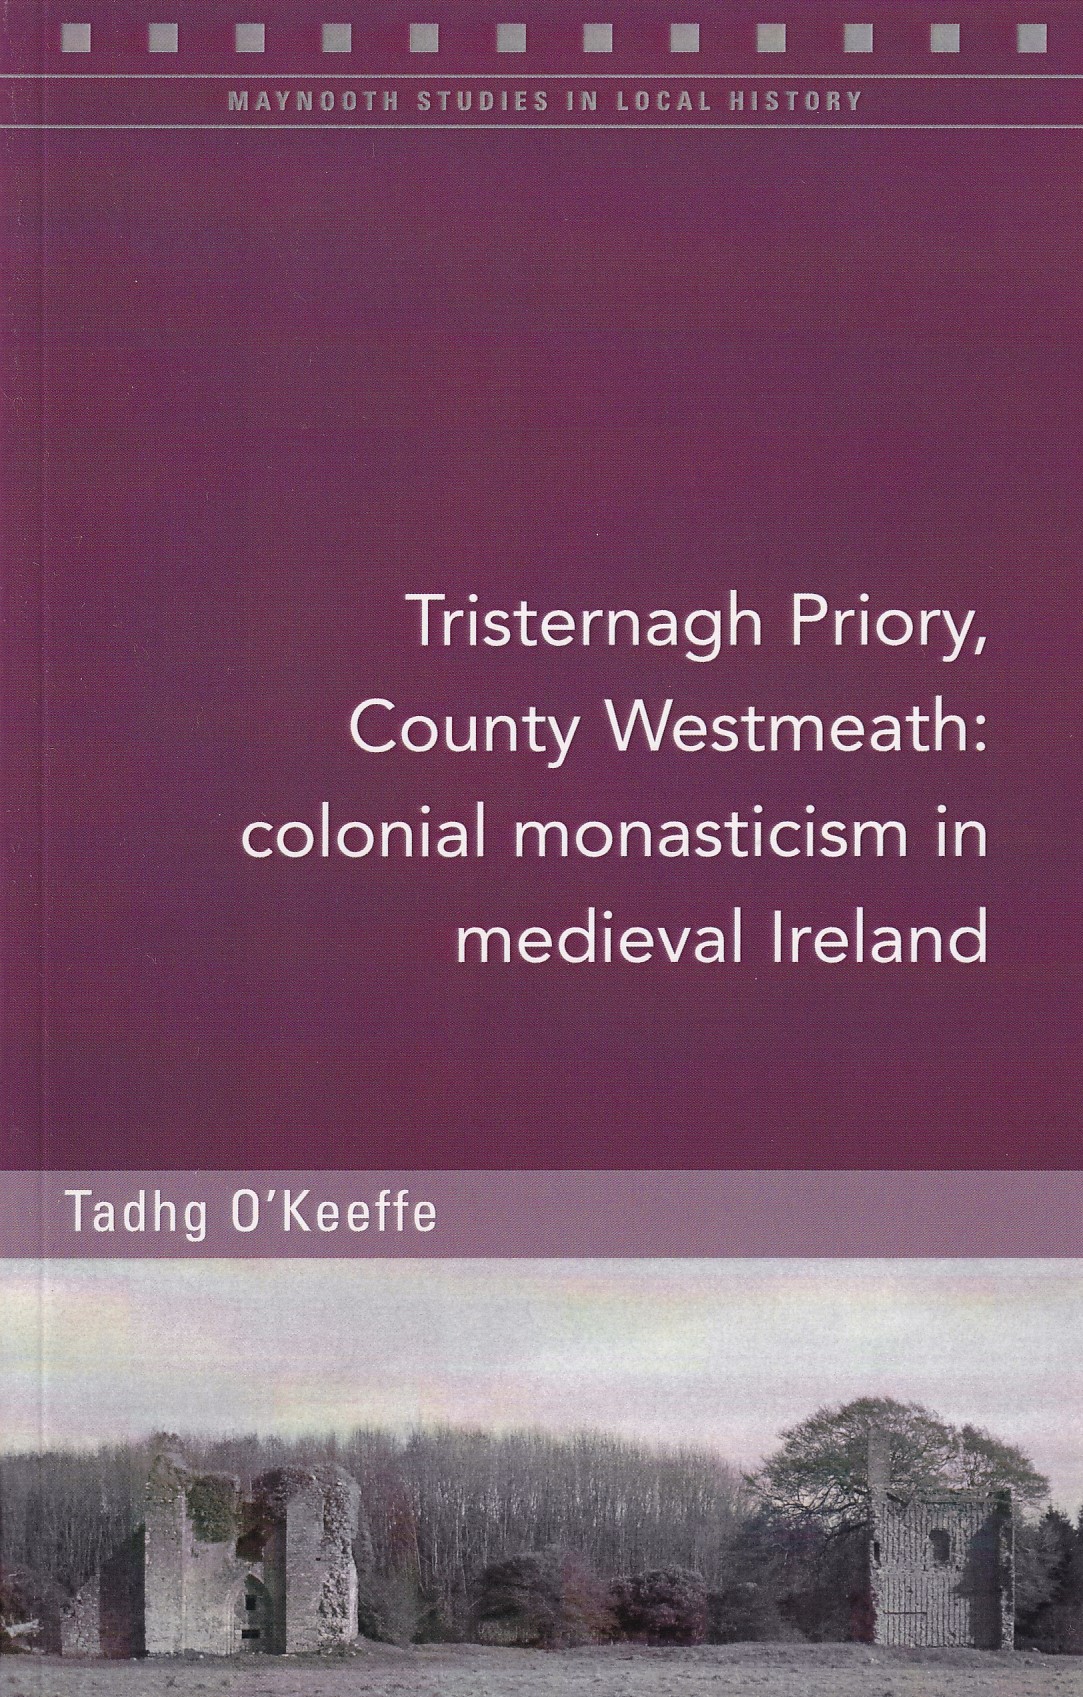 Tristernagh Priory, County Westmeath: Colonial Monasticism in Medieval Ireland by Tadhg O'Keeffe